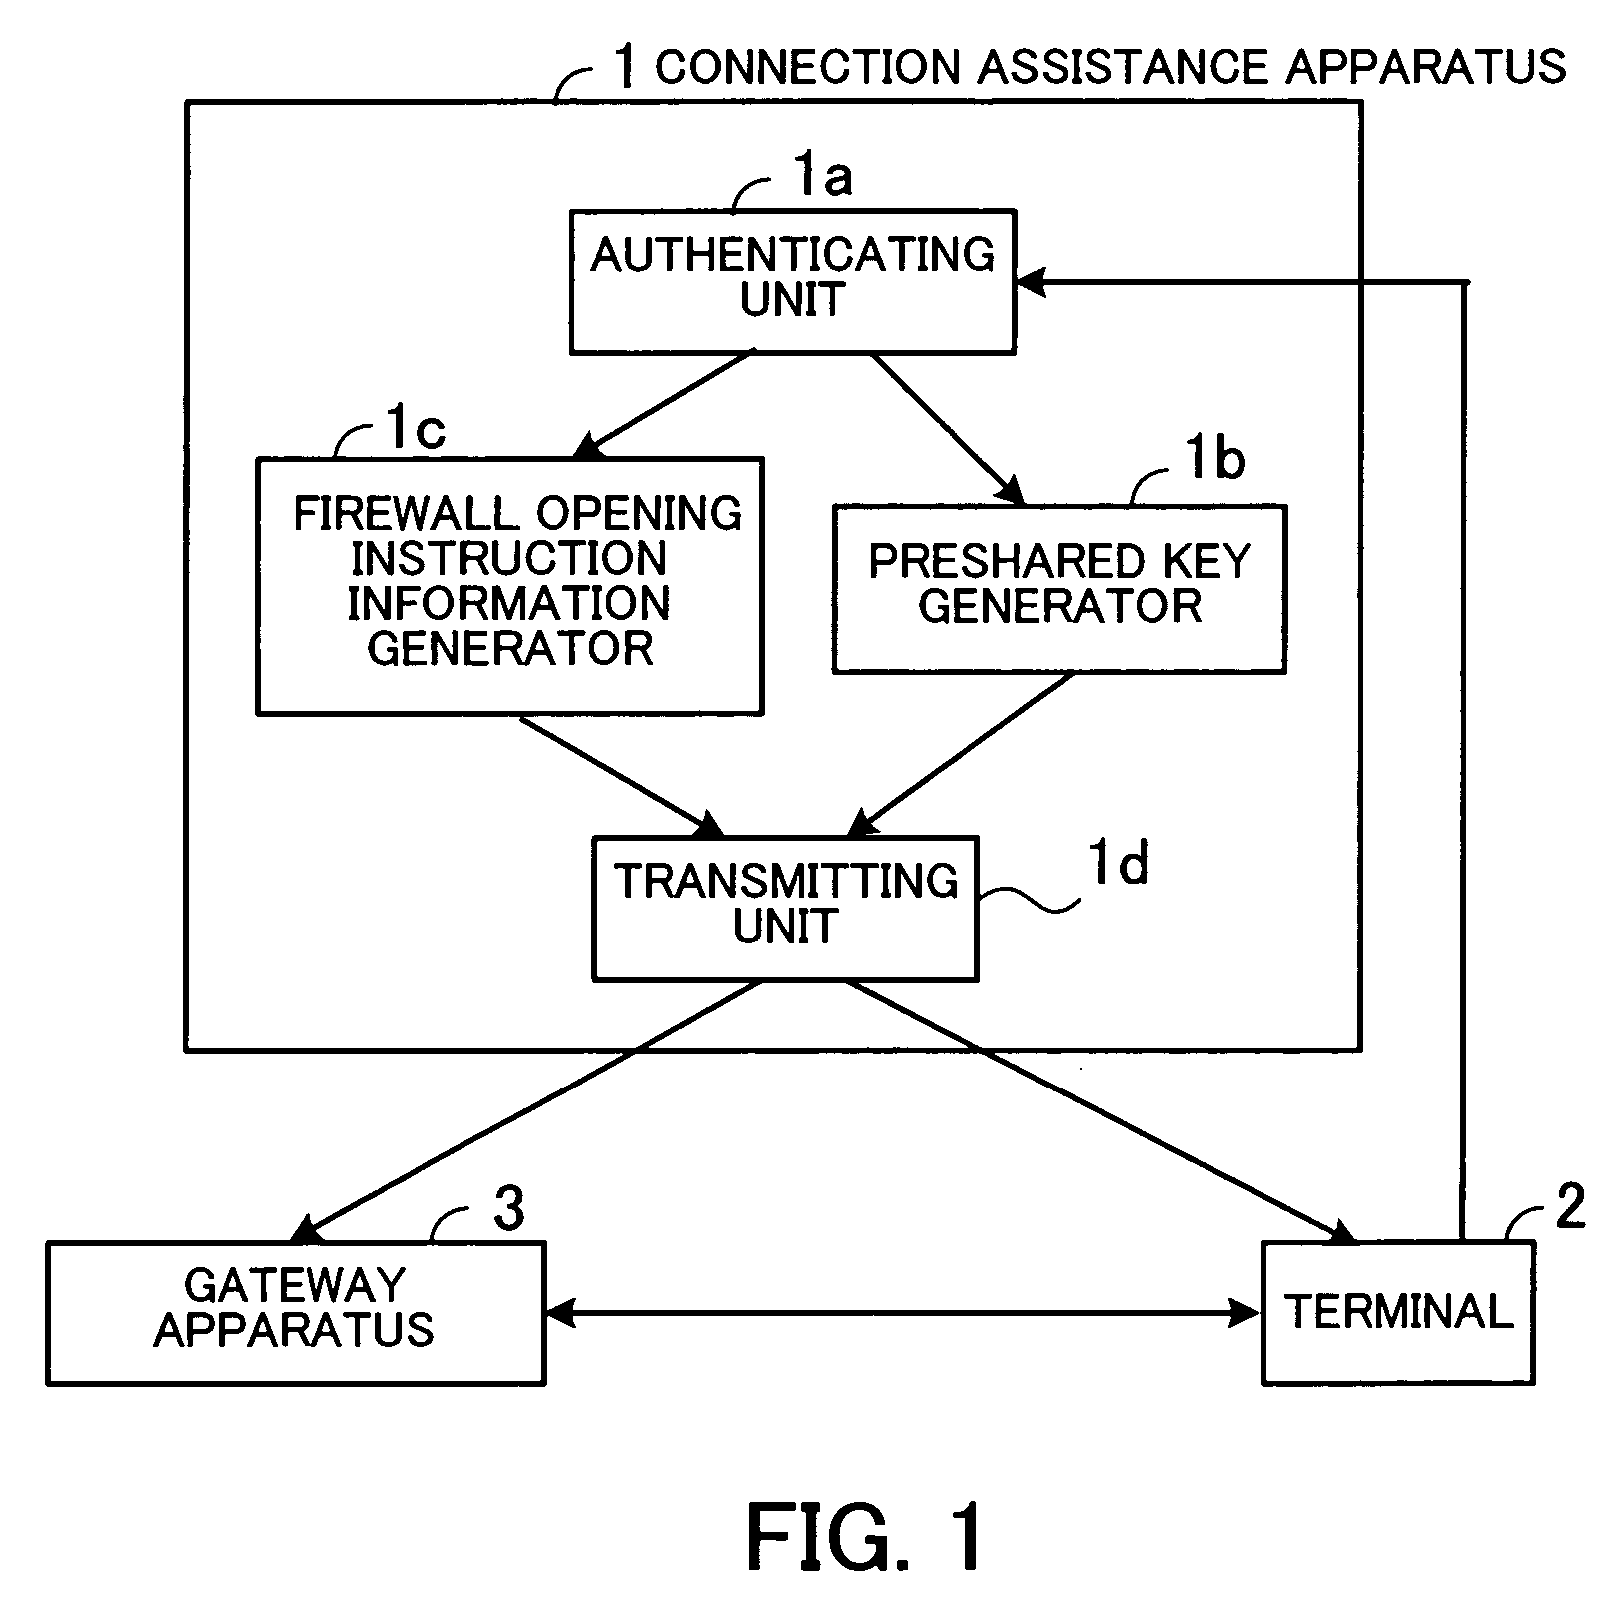 Connection assistance apparatus and gateway apparatus